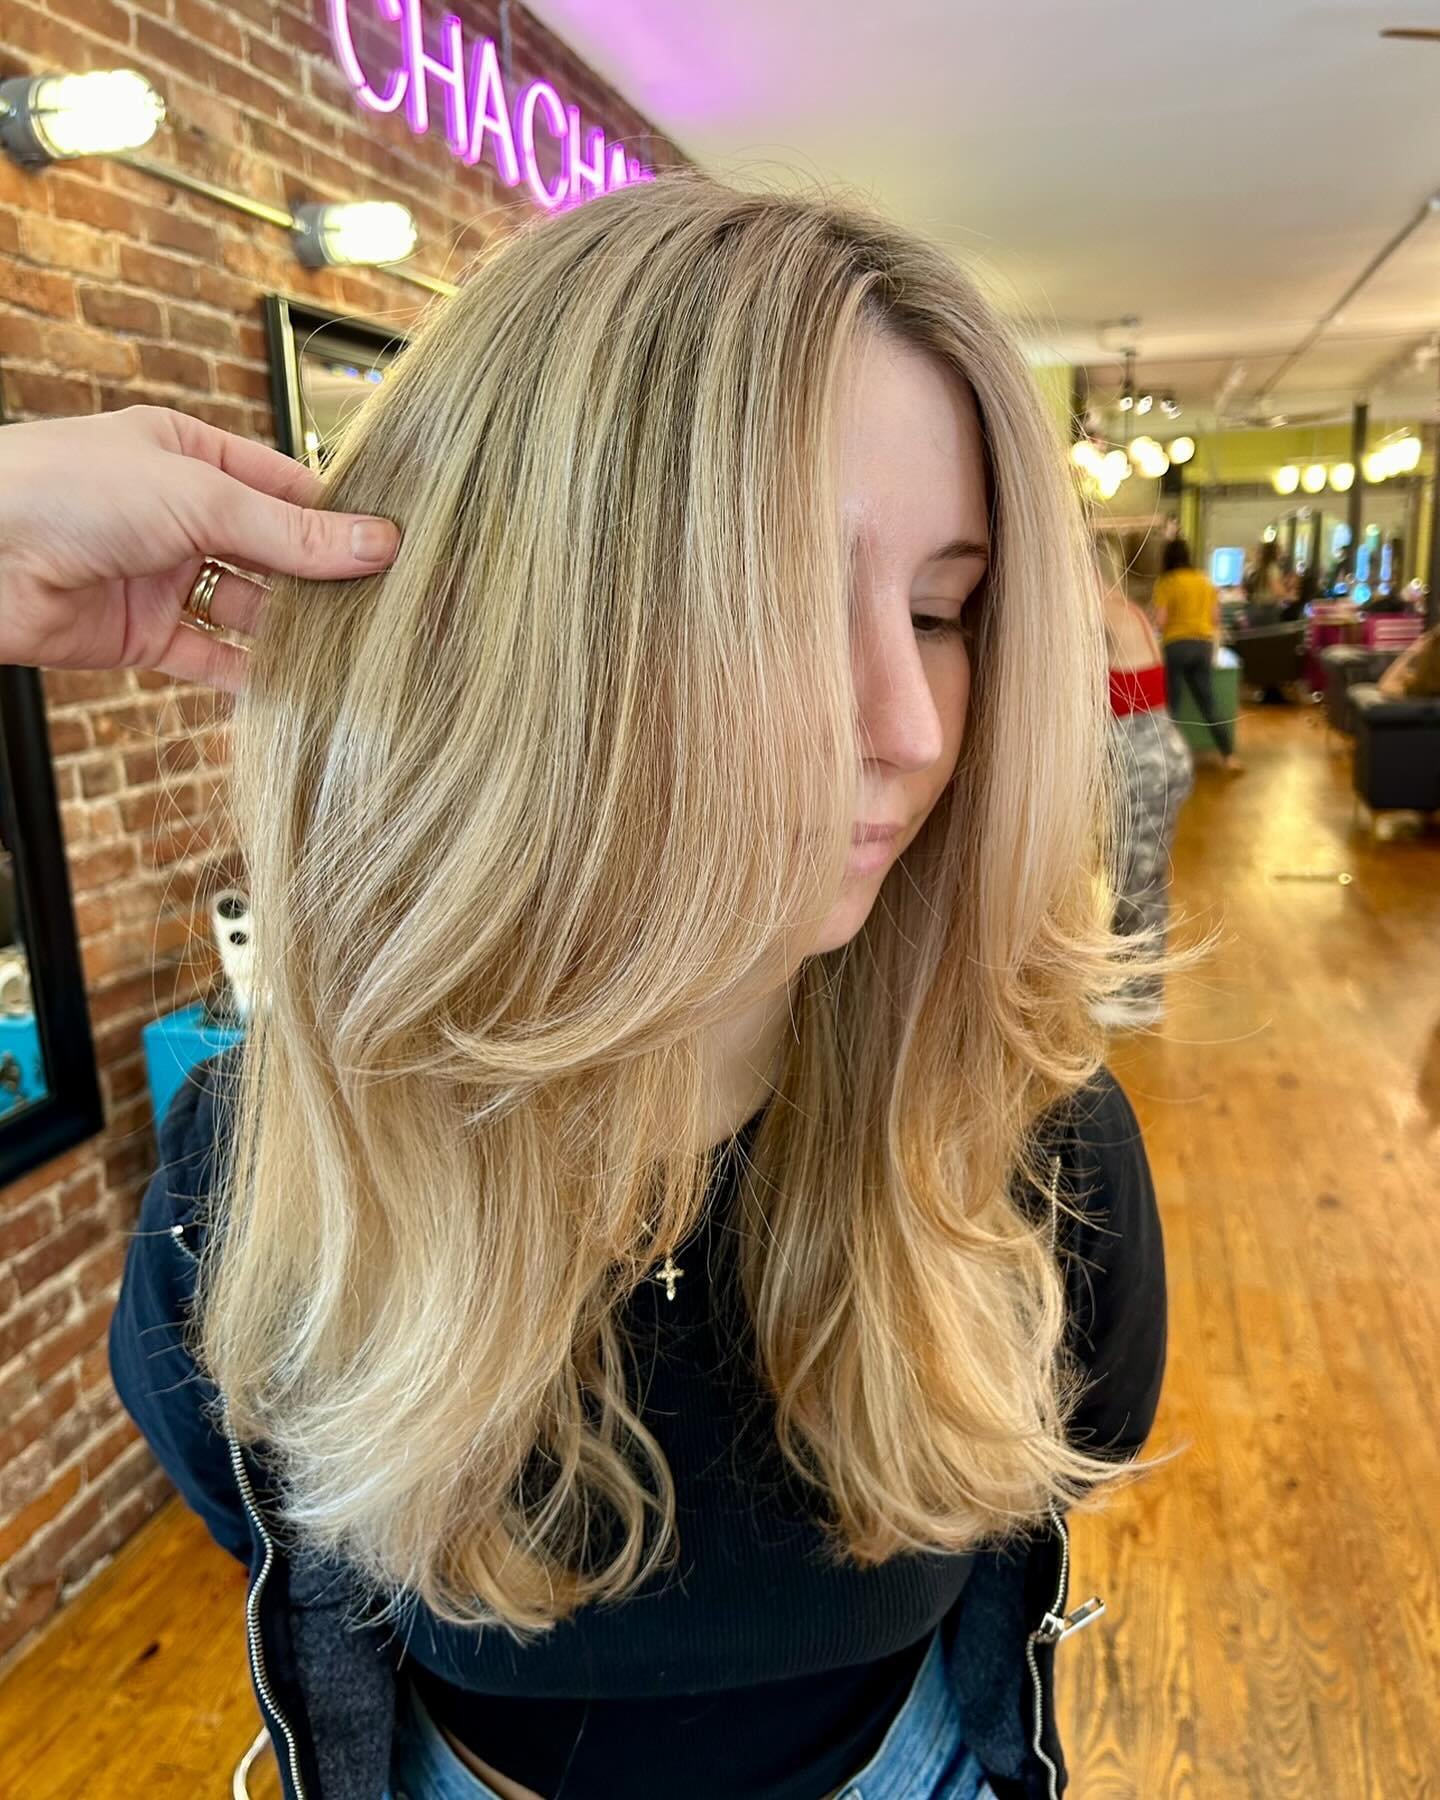 Summer hair tip? Use mineral based sunscreen this summer to help protect that color honey! 

#blondehair #highlight #wellaprofessional #professional #kentuckyhairs #hairstylist #lexingtonkentucky #blondesummer #blondebalayage #blondehighlights